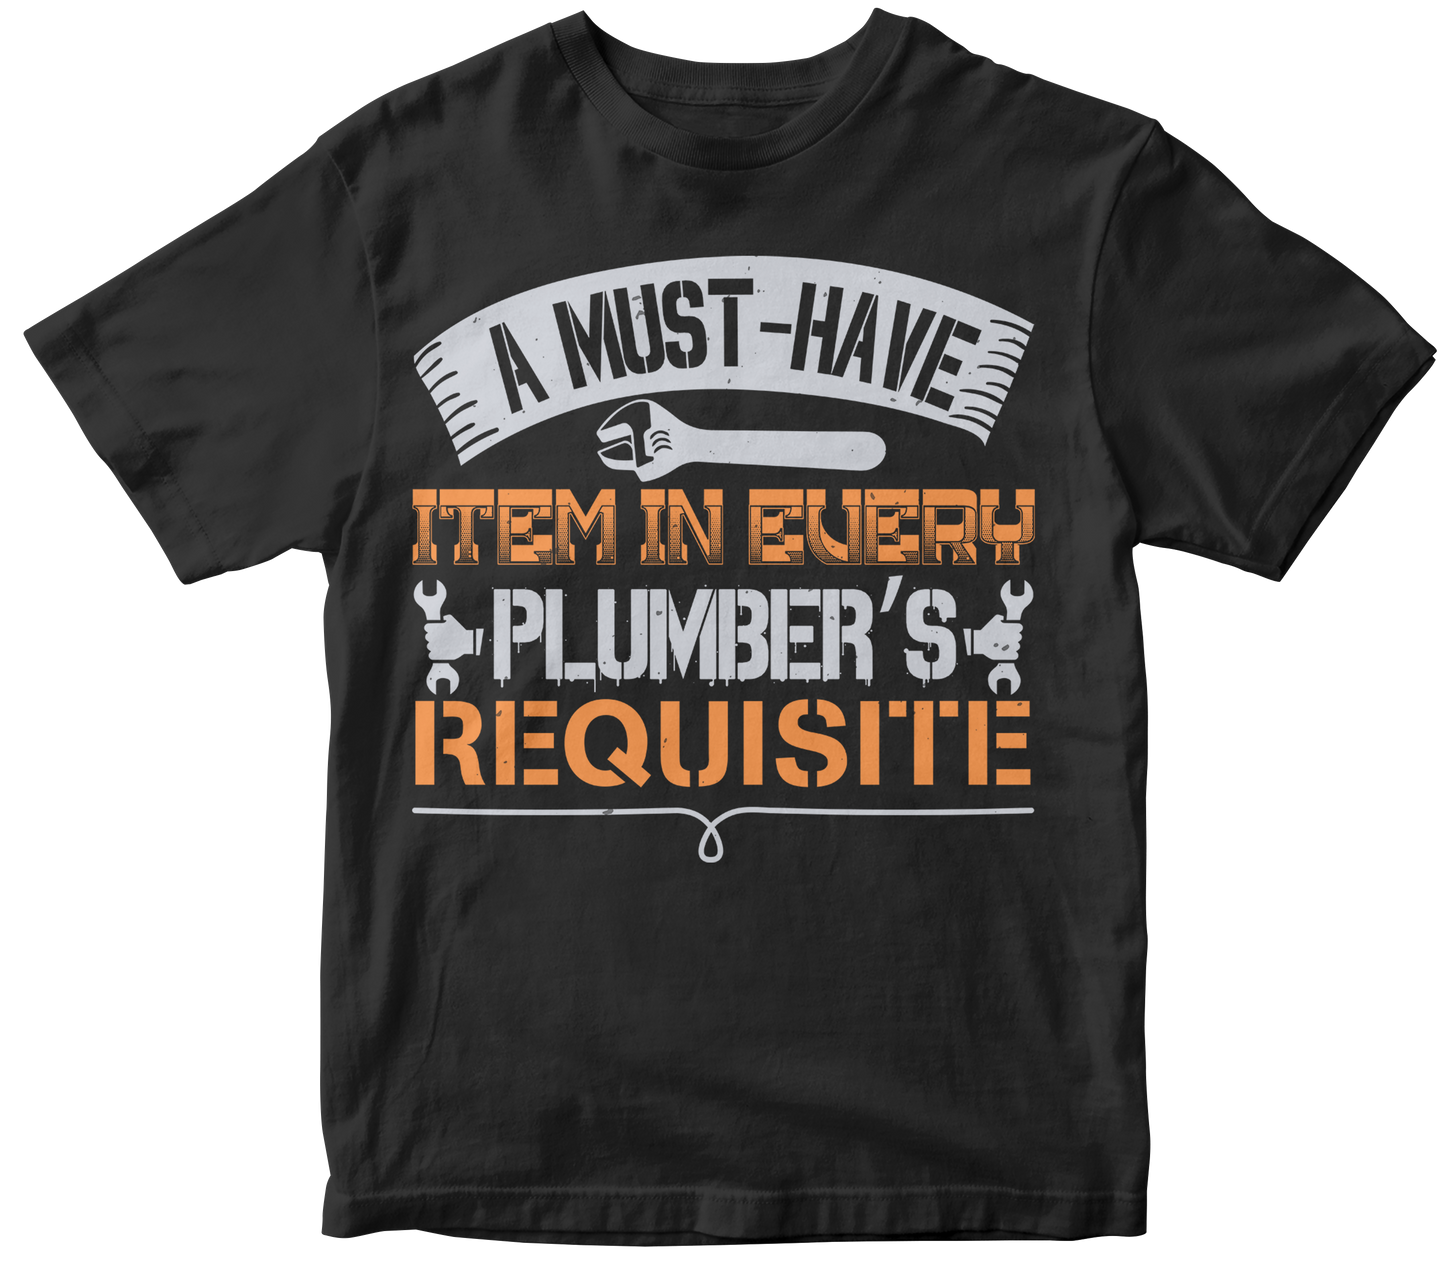 A must have item in every plumber